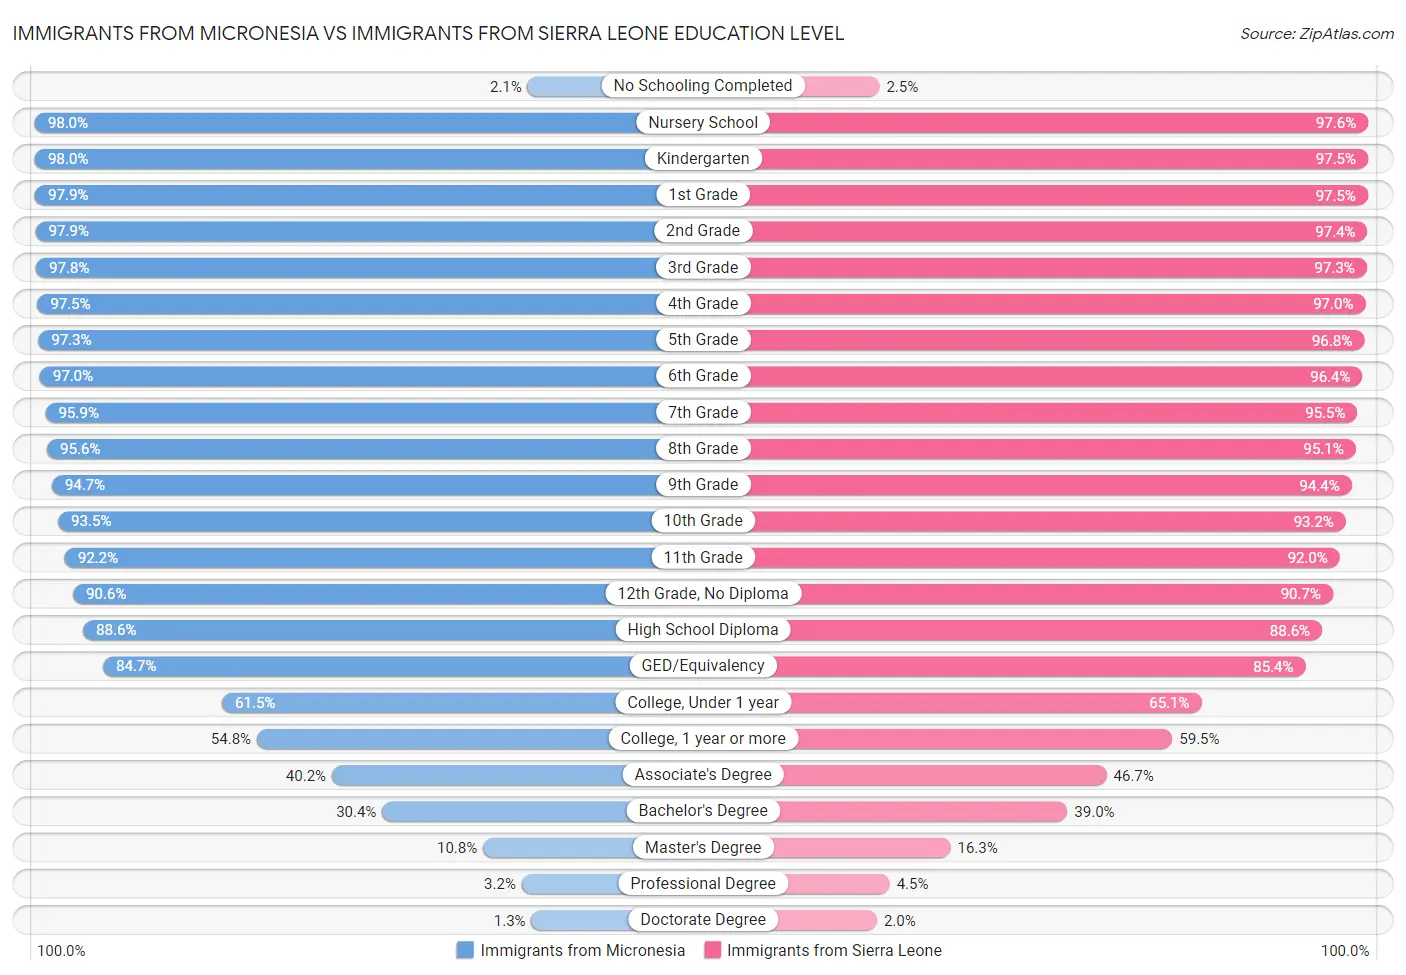 Immigrants from Micronesia vs Immigrants from Sierra Leone Education Level